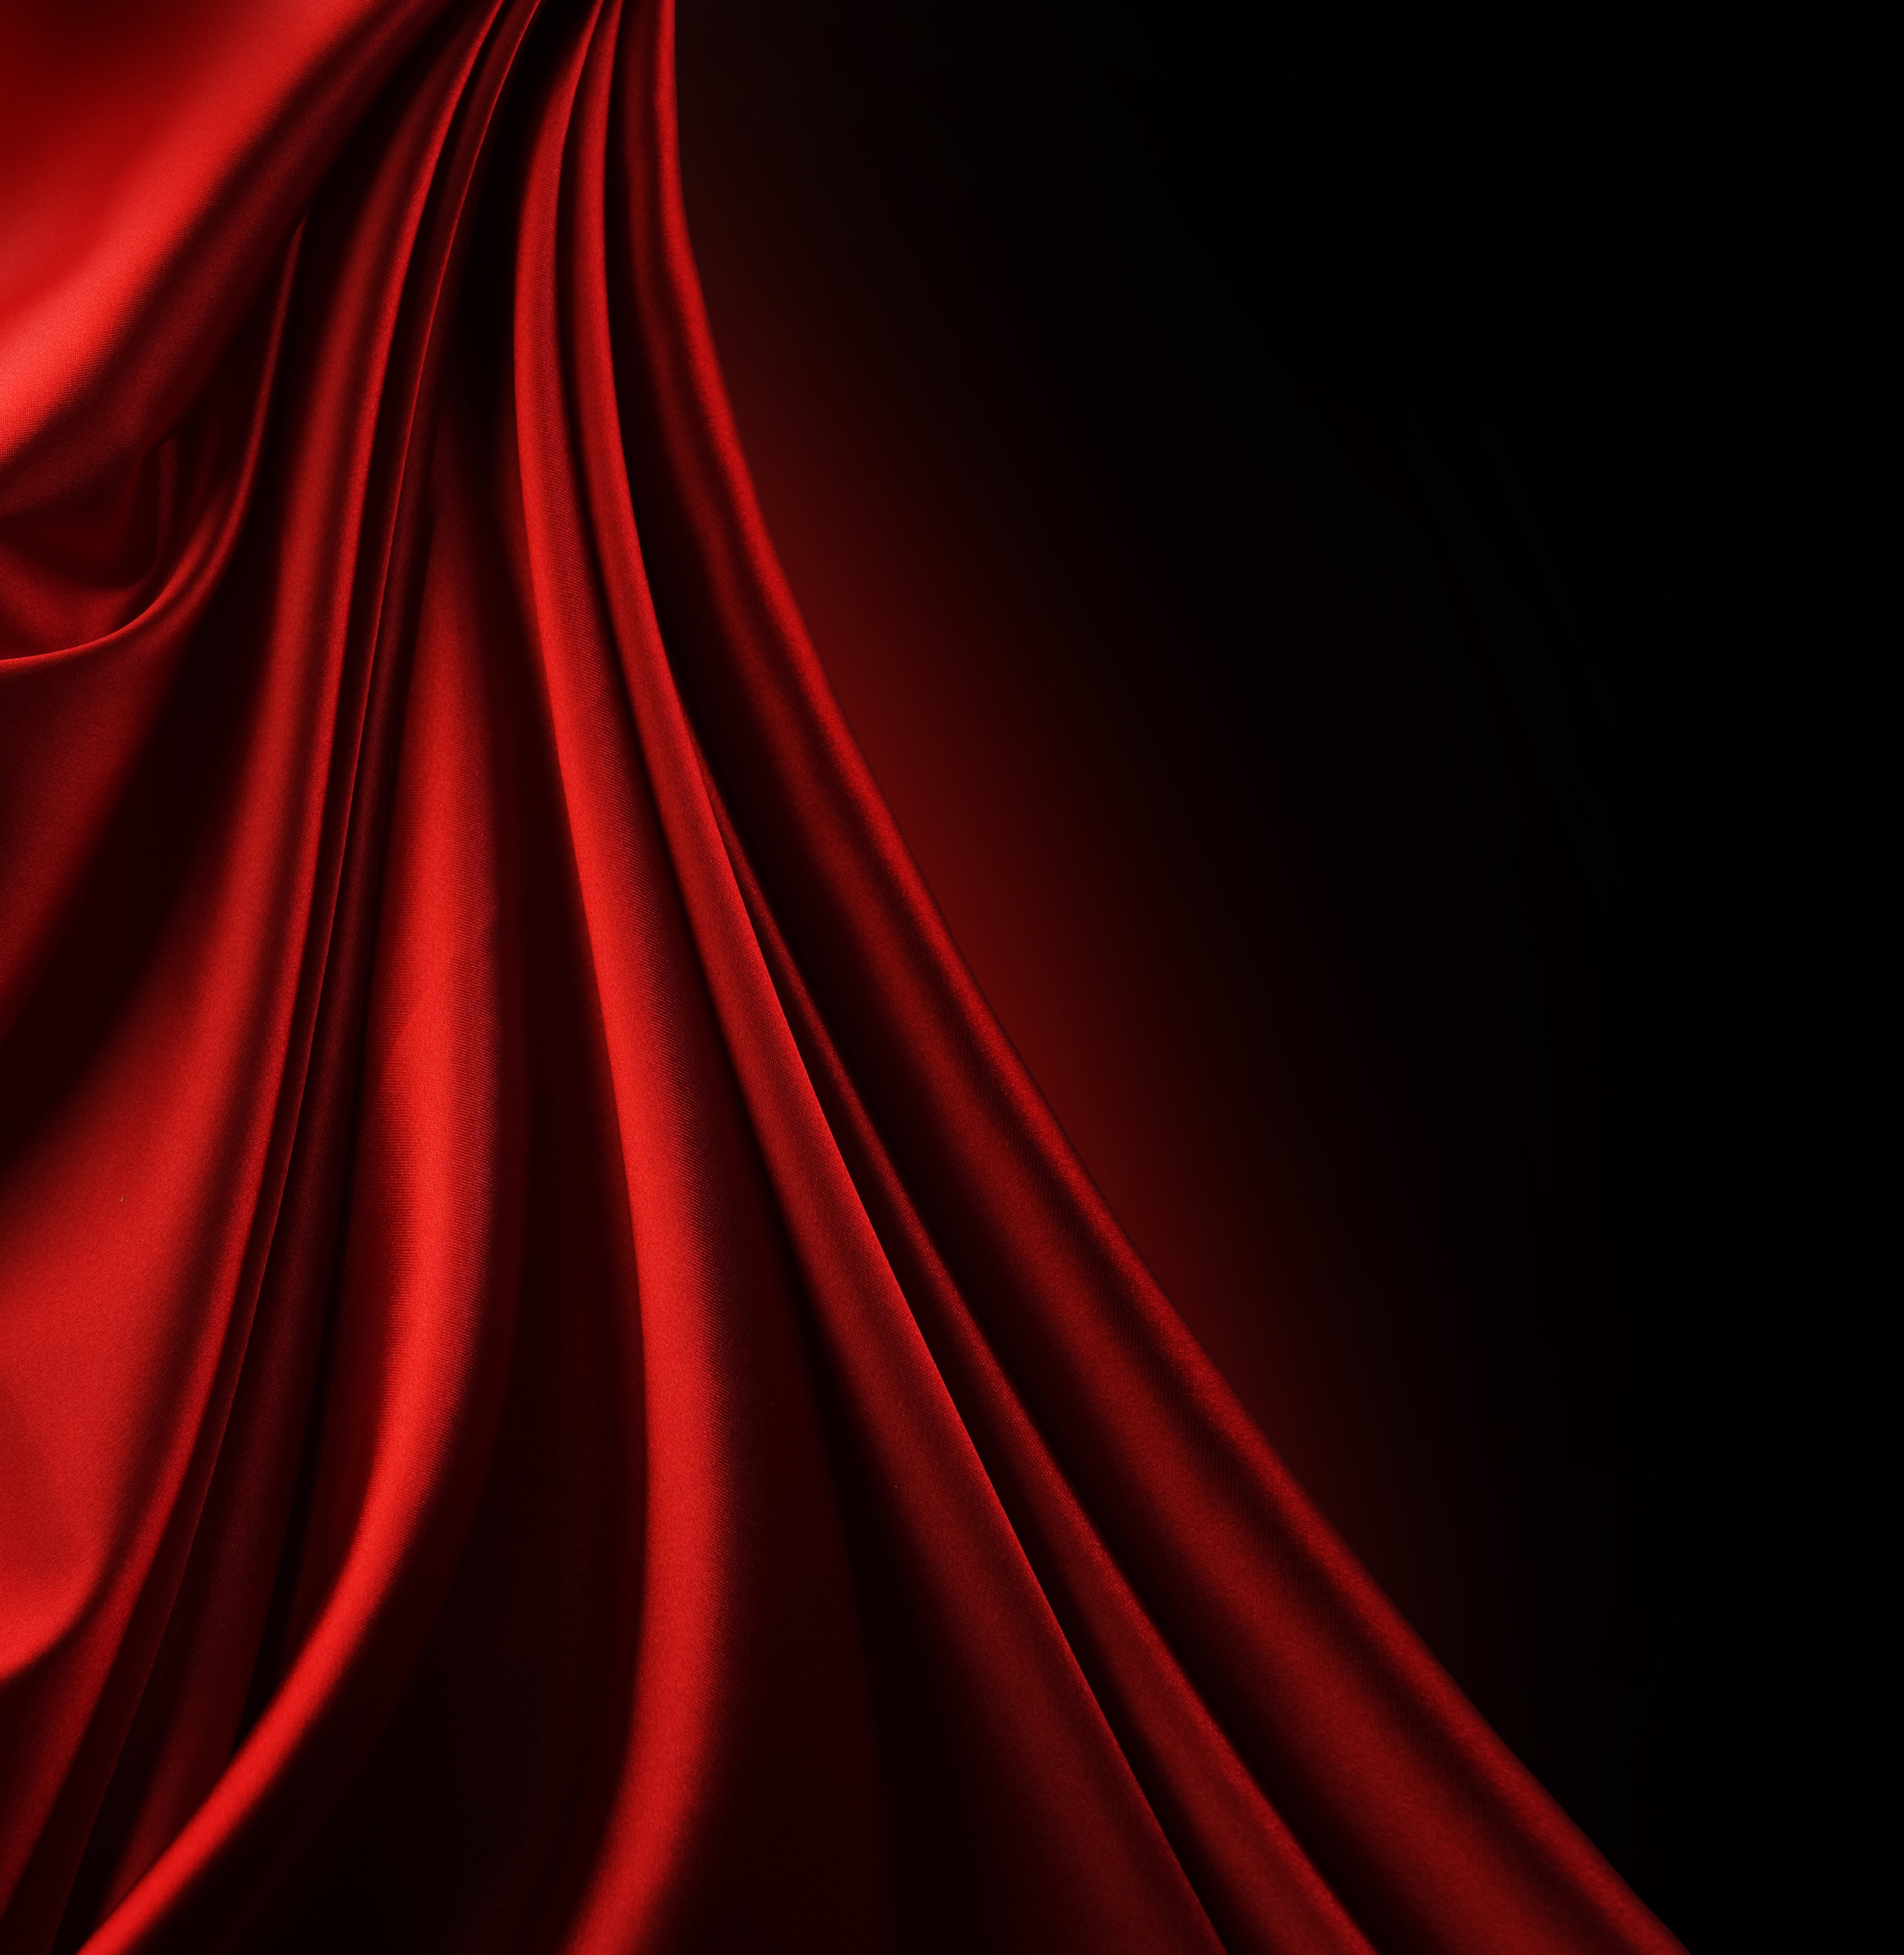 red fabric cloth background silk download photo background